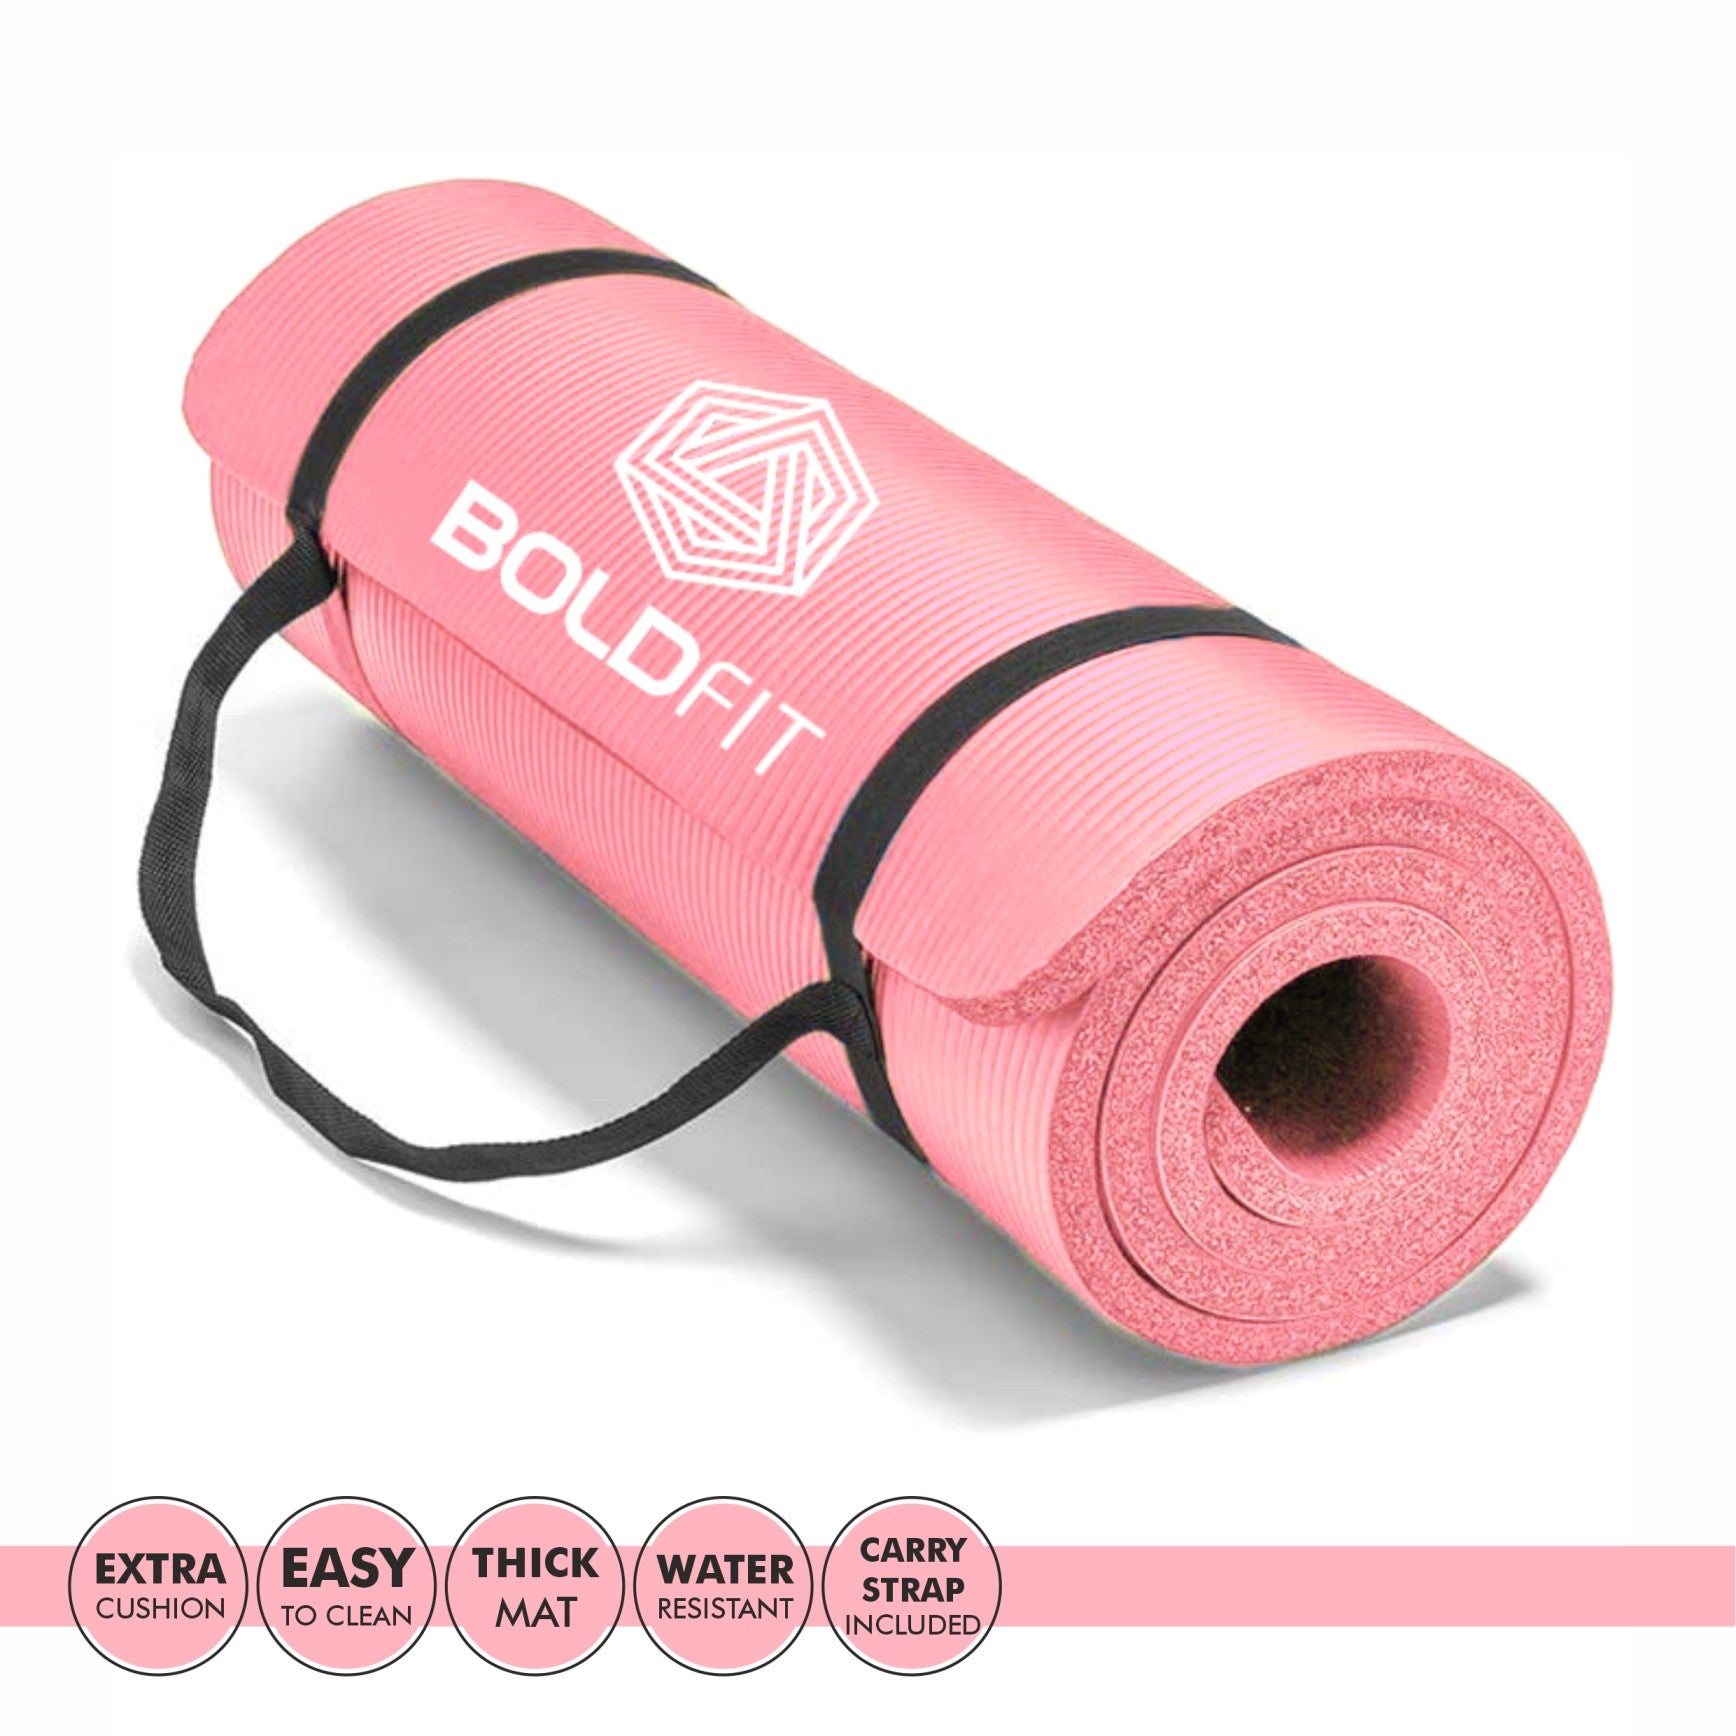 Boldfit NBR Yoga mat for men and women with Carrying Strap